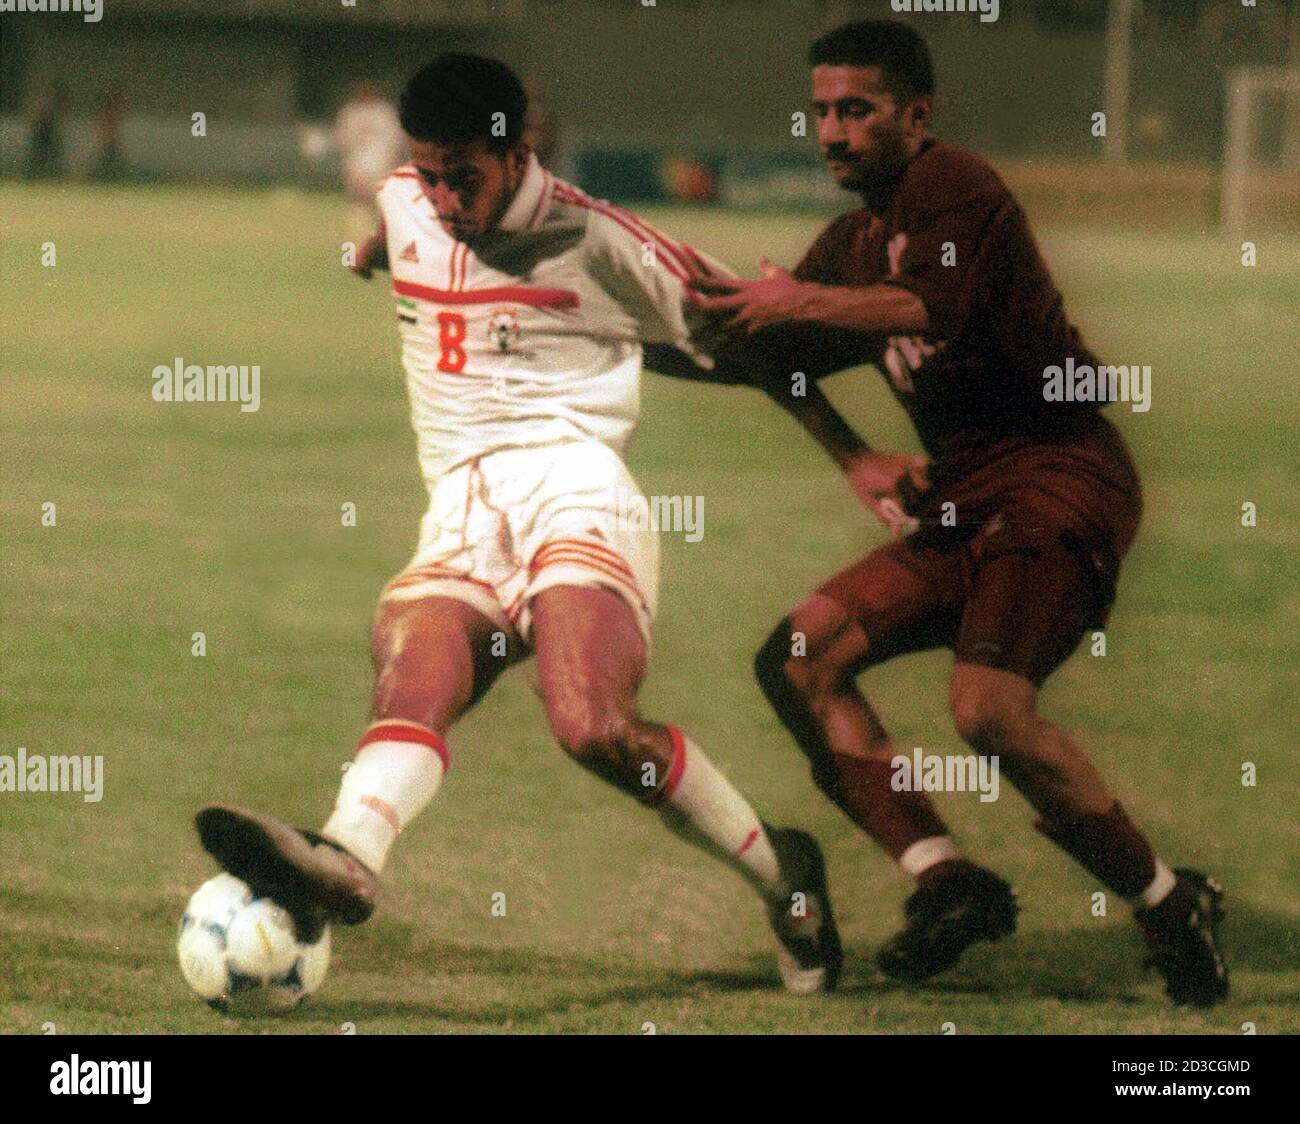 Ali Yaser Salem Saleh (L) of the United Arab Emirates tries to evade a  tackle from Qatar's Mohammed Abdul Rahman during their World Cup 2002 Asian  group B qualifying match in Abu